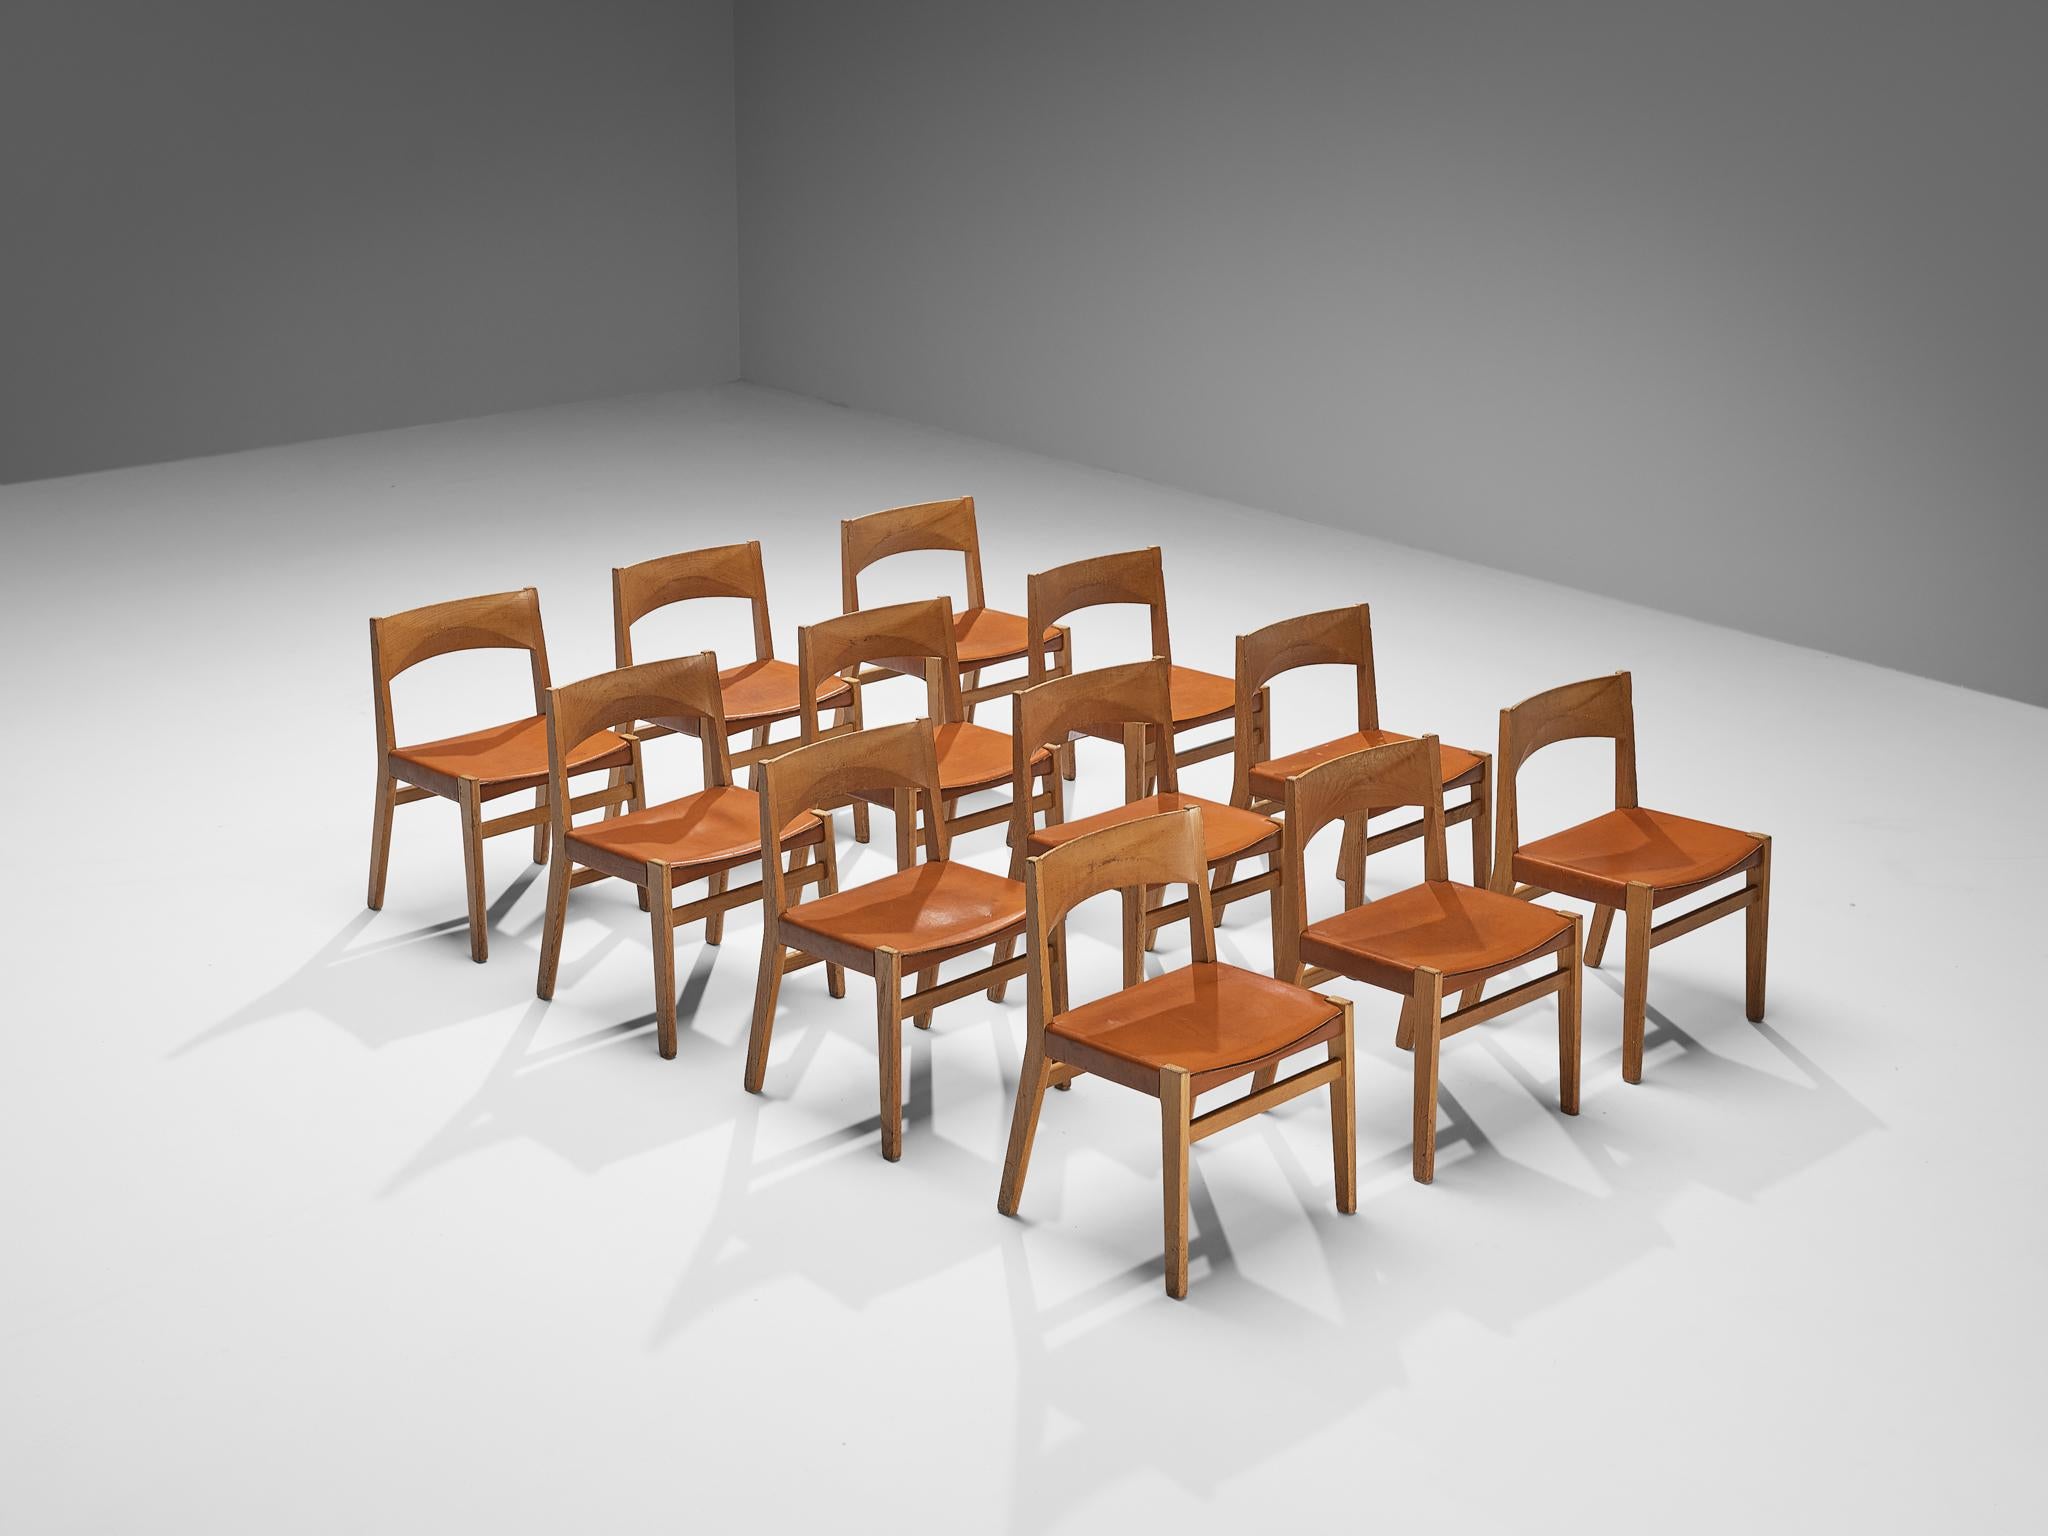 John Vedel Rieper for Källemo, set of twelve dining chairs, oak, leather, Denmark, 1960s

This design features a constructive frame with sleek lines and geometric shapes. The seat is covered with cognac leather that complements the sturdy character